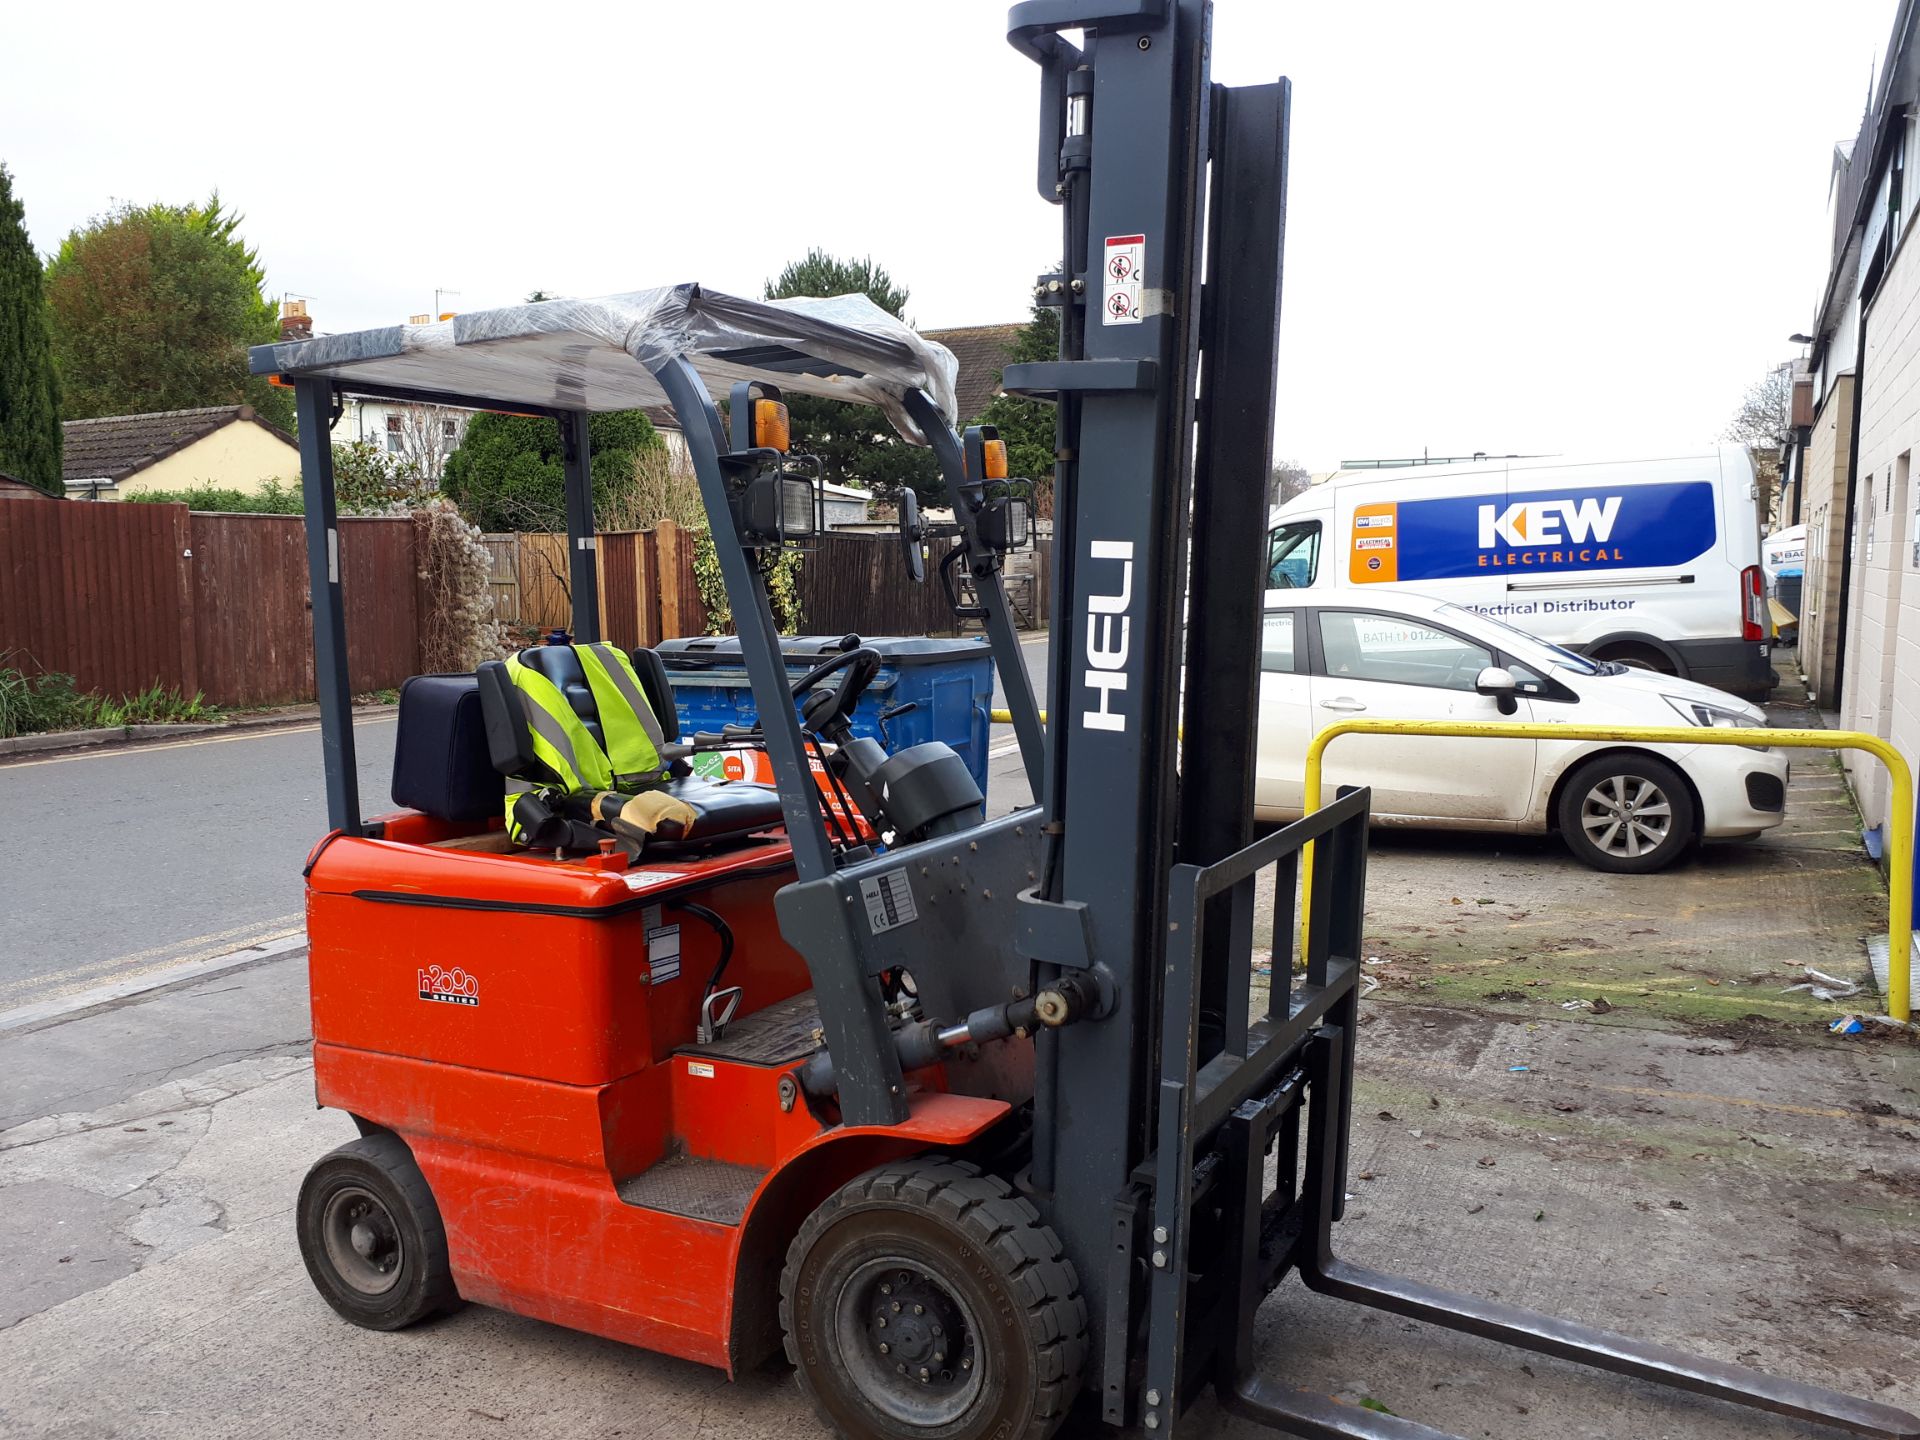 Heli HFP15 1.5Ton Electric Forklift Truck, Twin Stage Mast, Serial Number G3355 (2009) 1,566.0 - Image 3 of 10